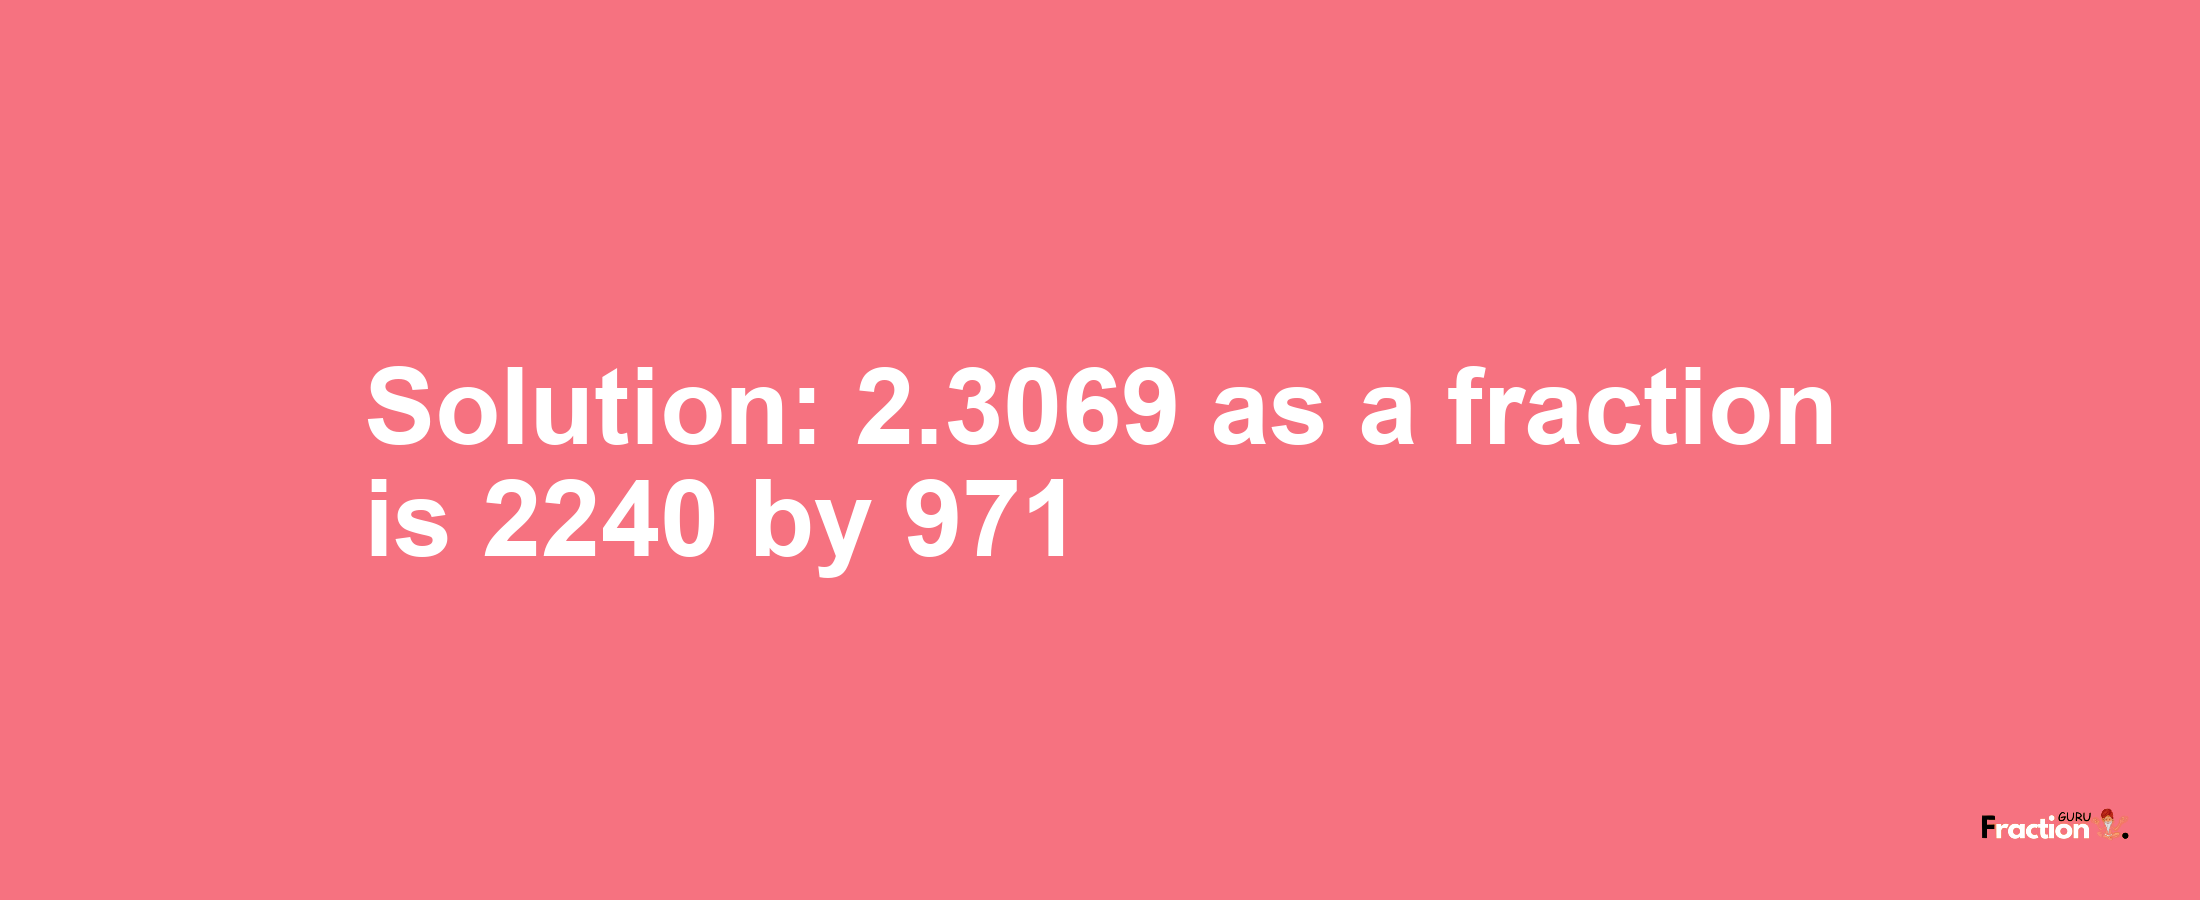 Solution:2.3069 as a fraction is 2240/971